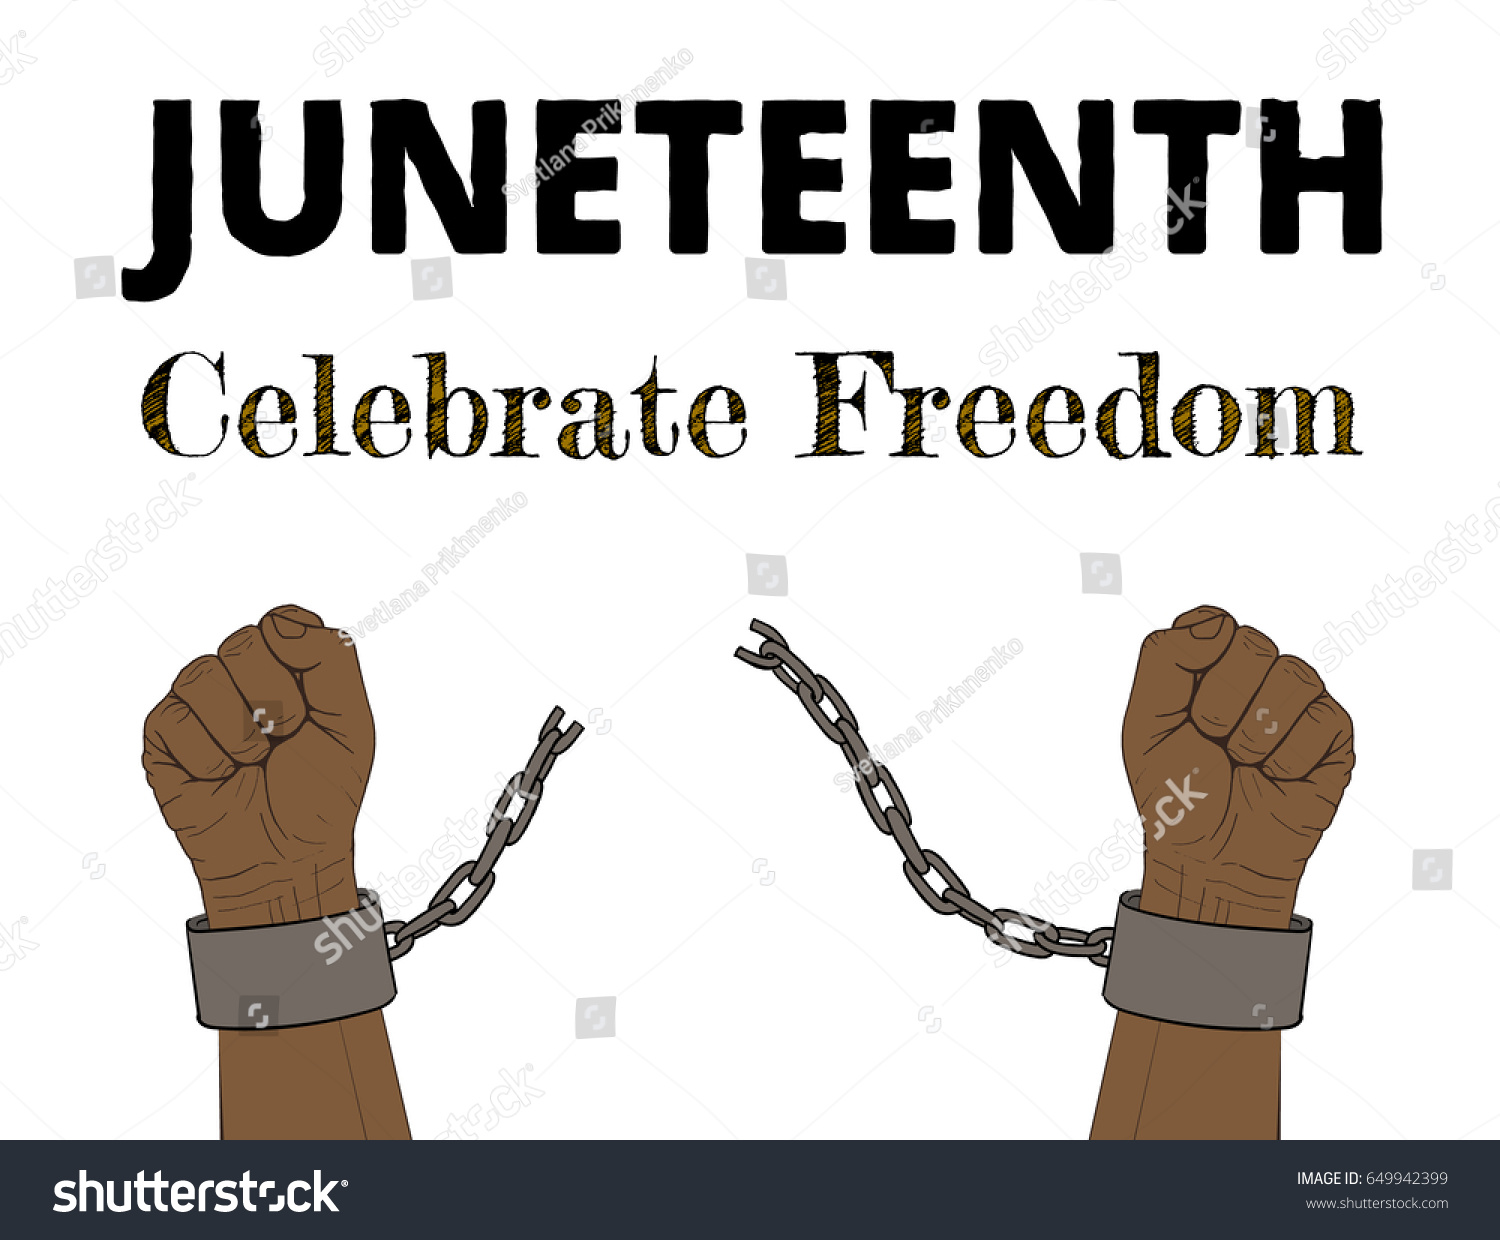 Juneteenth Celebrate Freedom Handdrawn Poster Hands Stock Vector ...